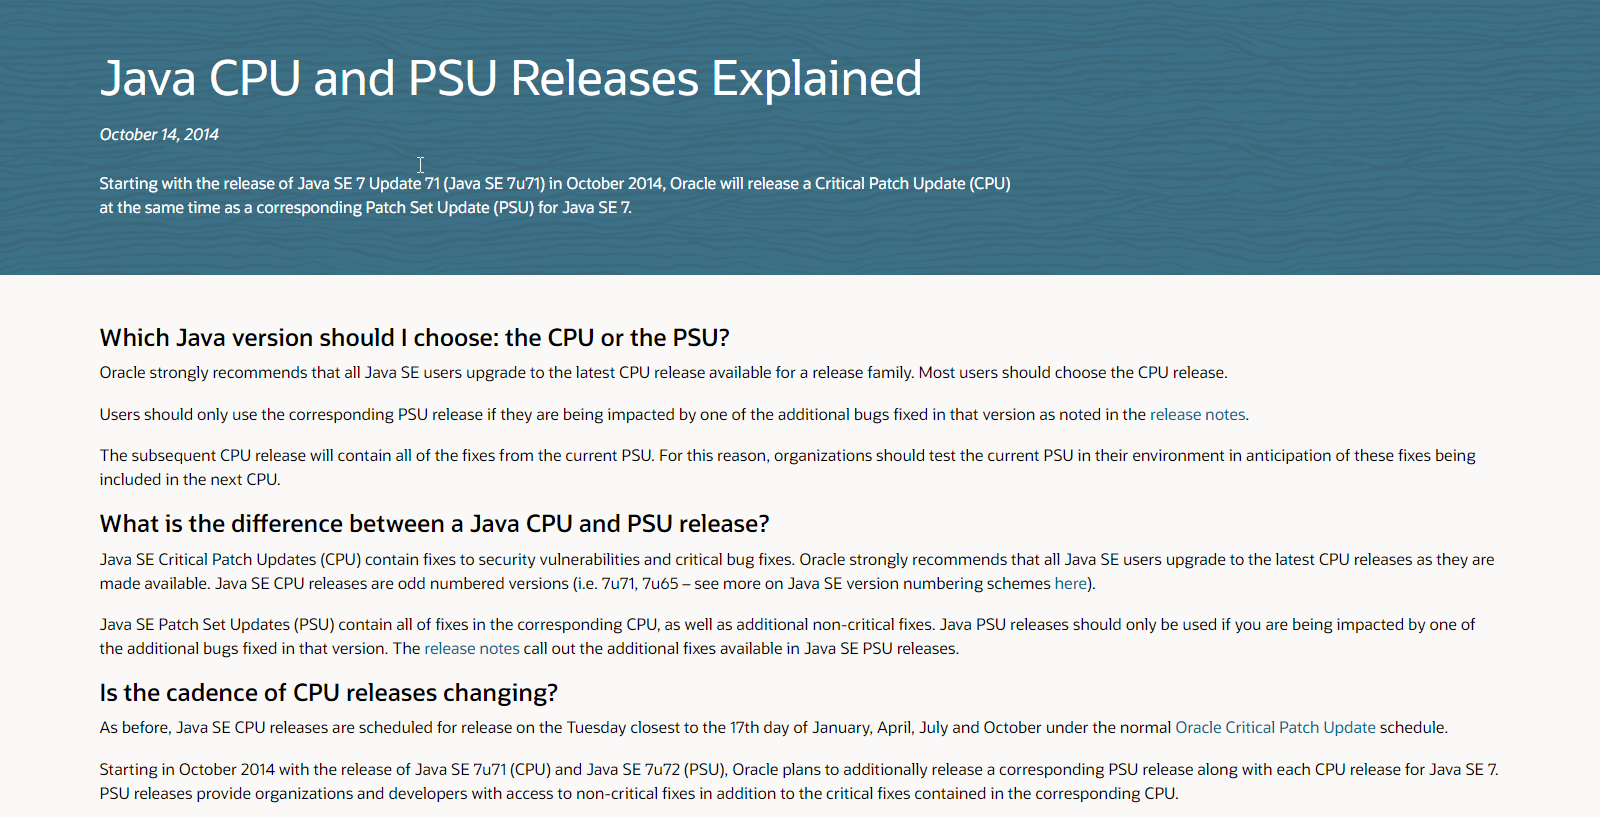 02(Java CPU and PSU Releases Explained)